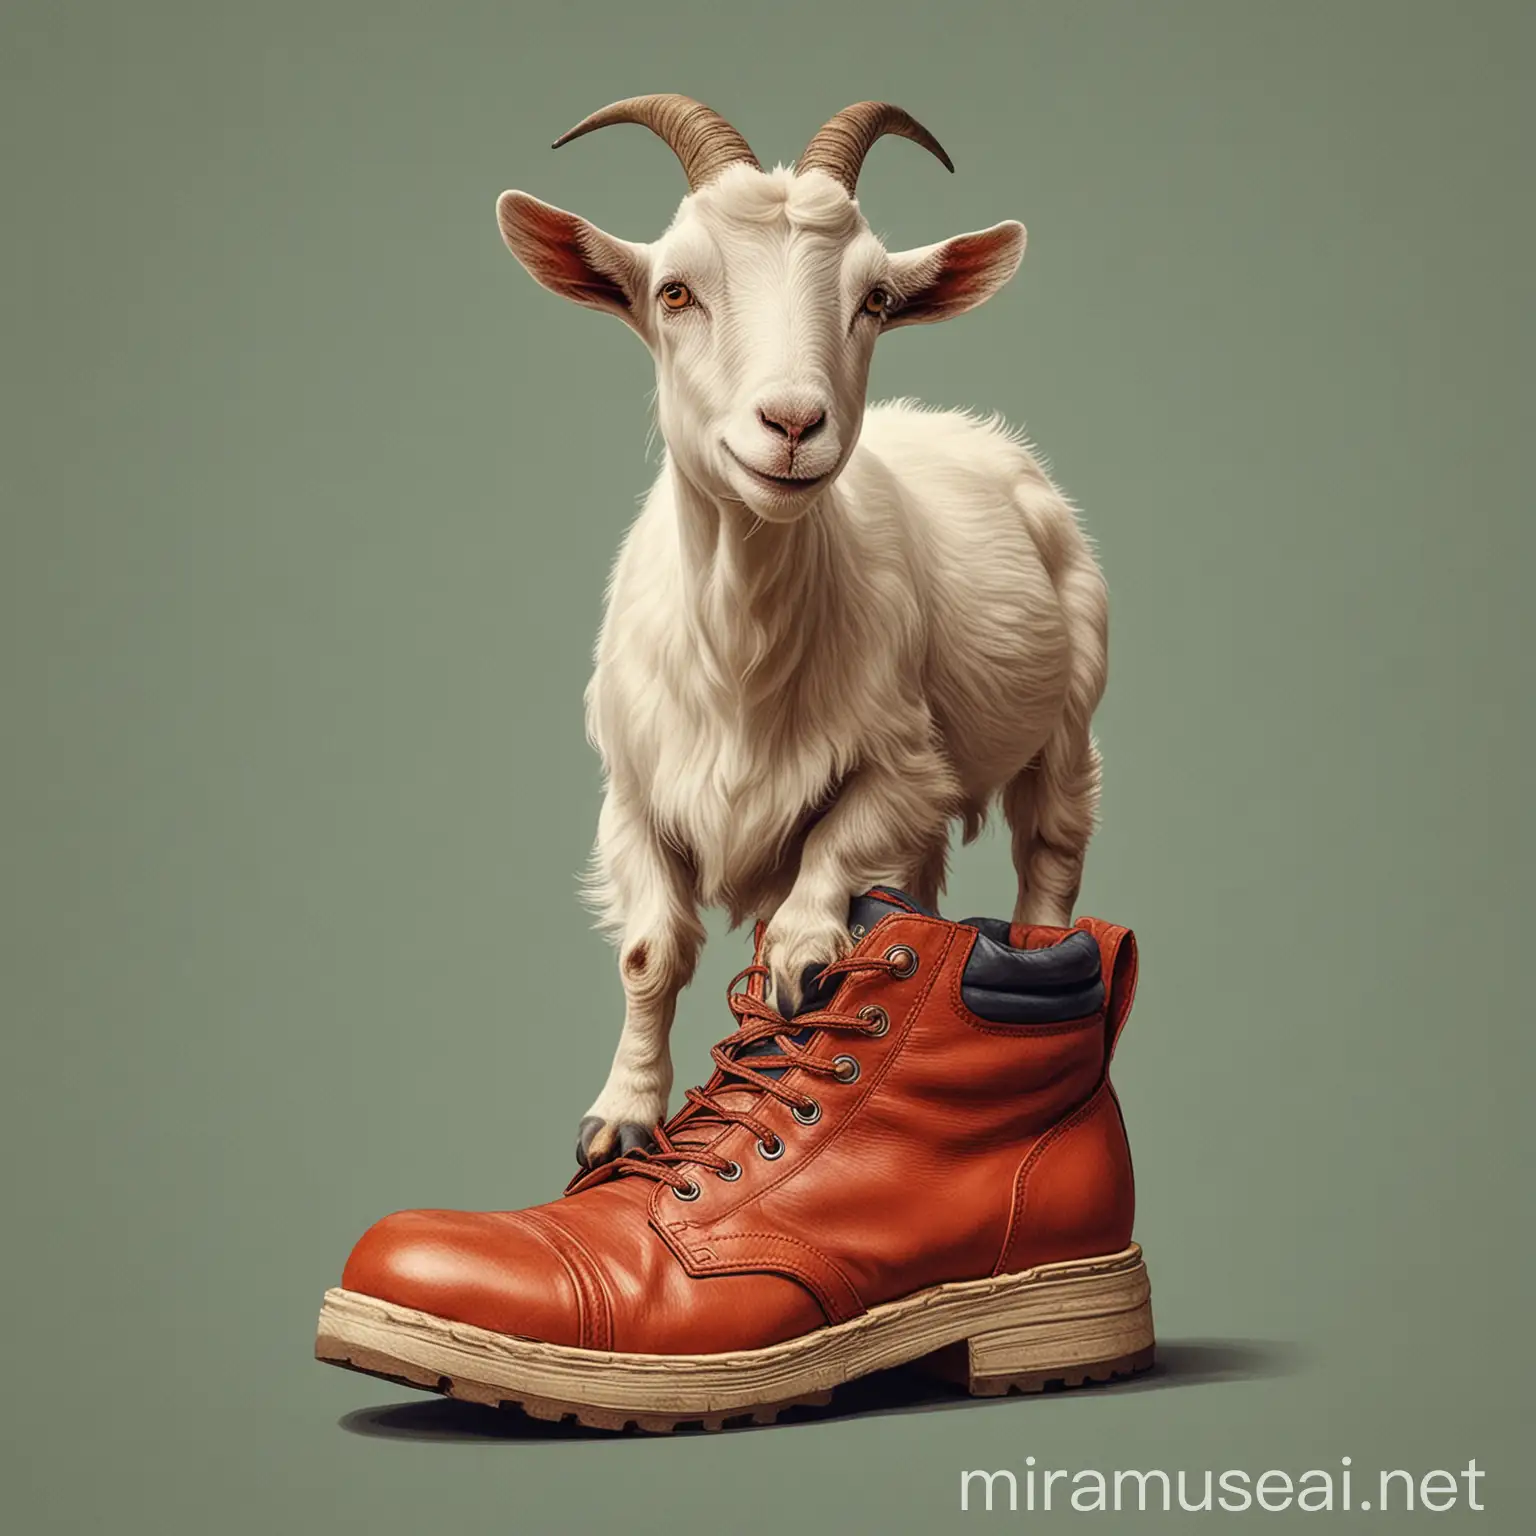 a goat is on his shoe vector poster design